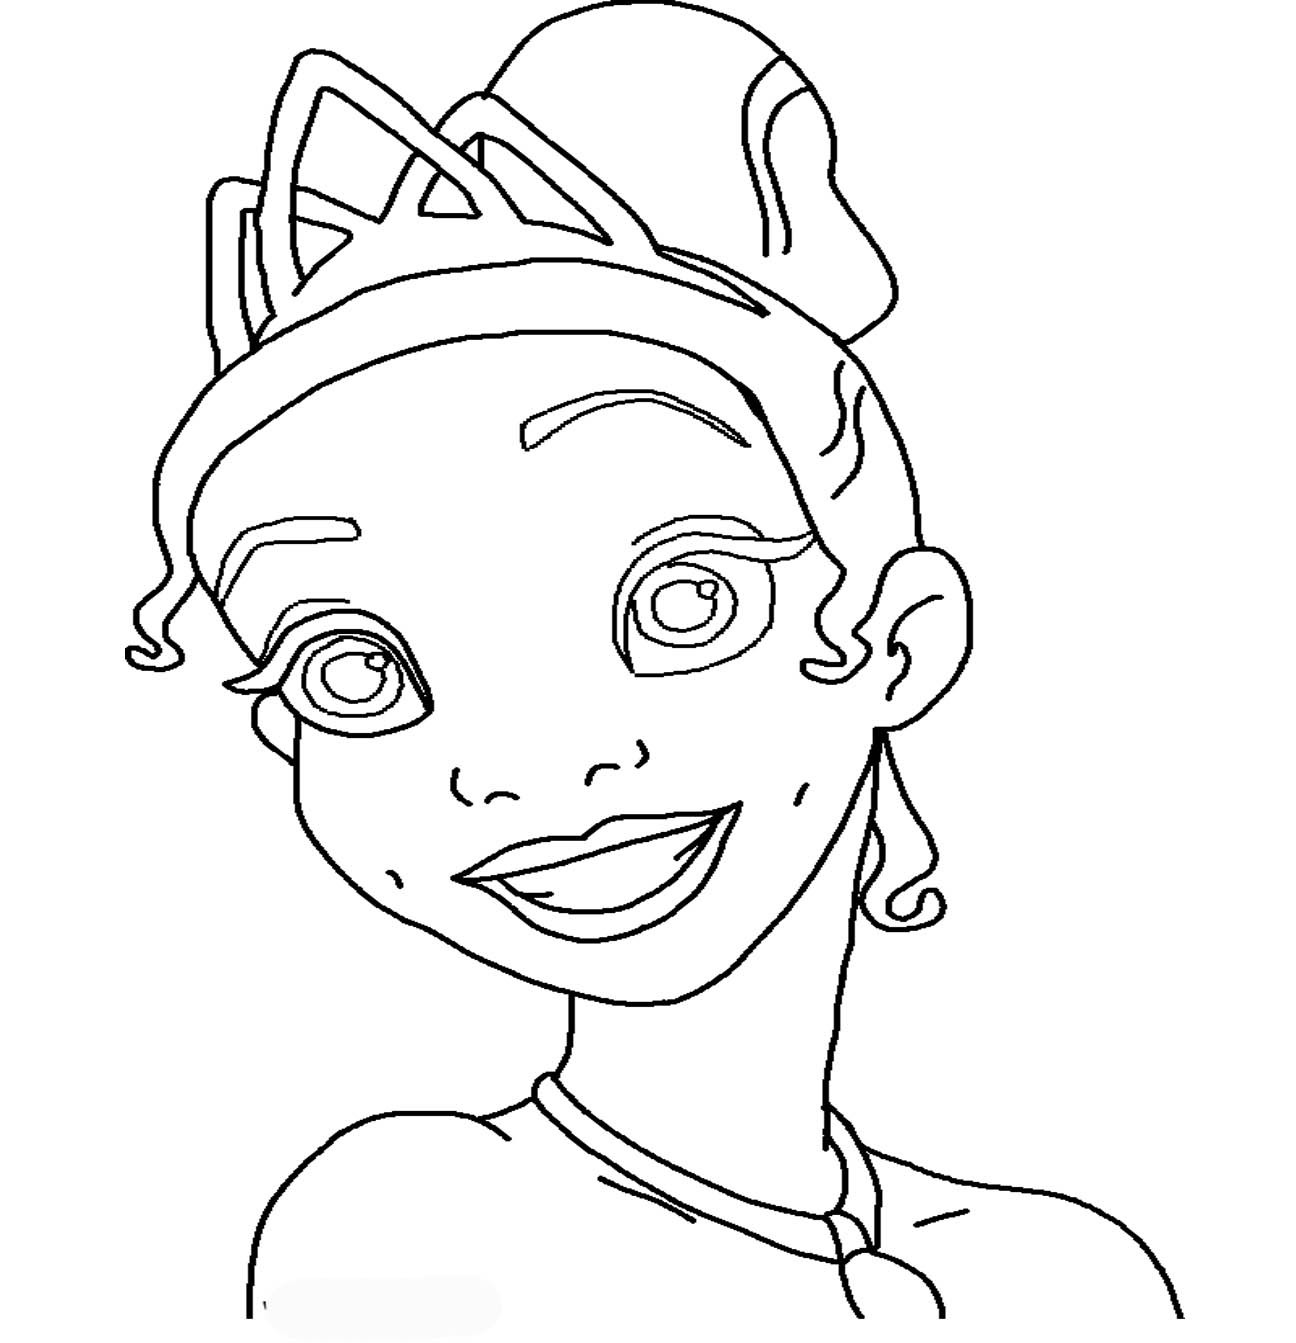 Disney Coloring Pages For Girls
 Disney Princess Tiana Coloring Pages To Girls